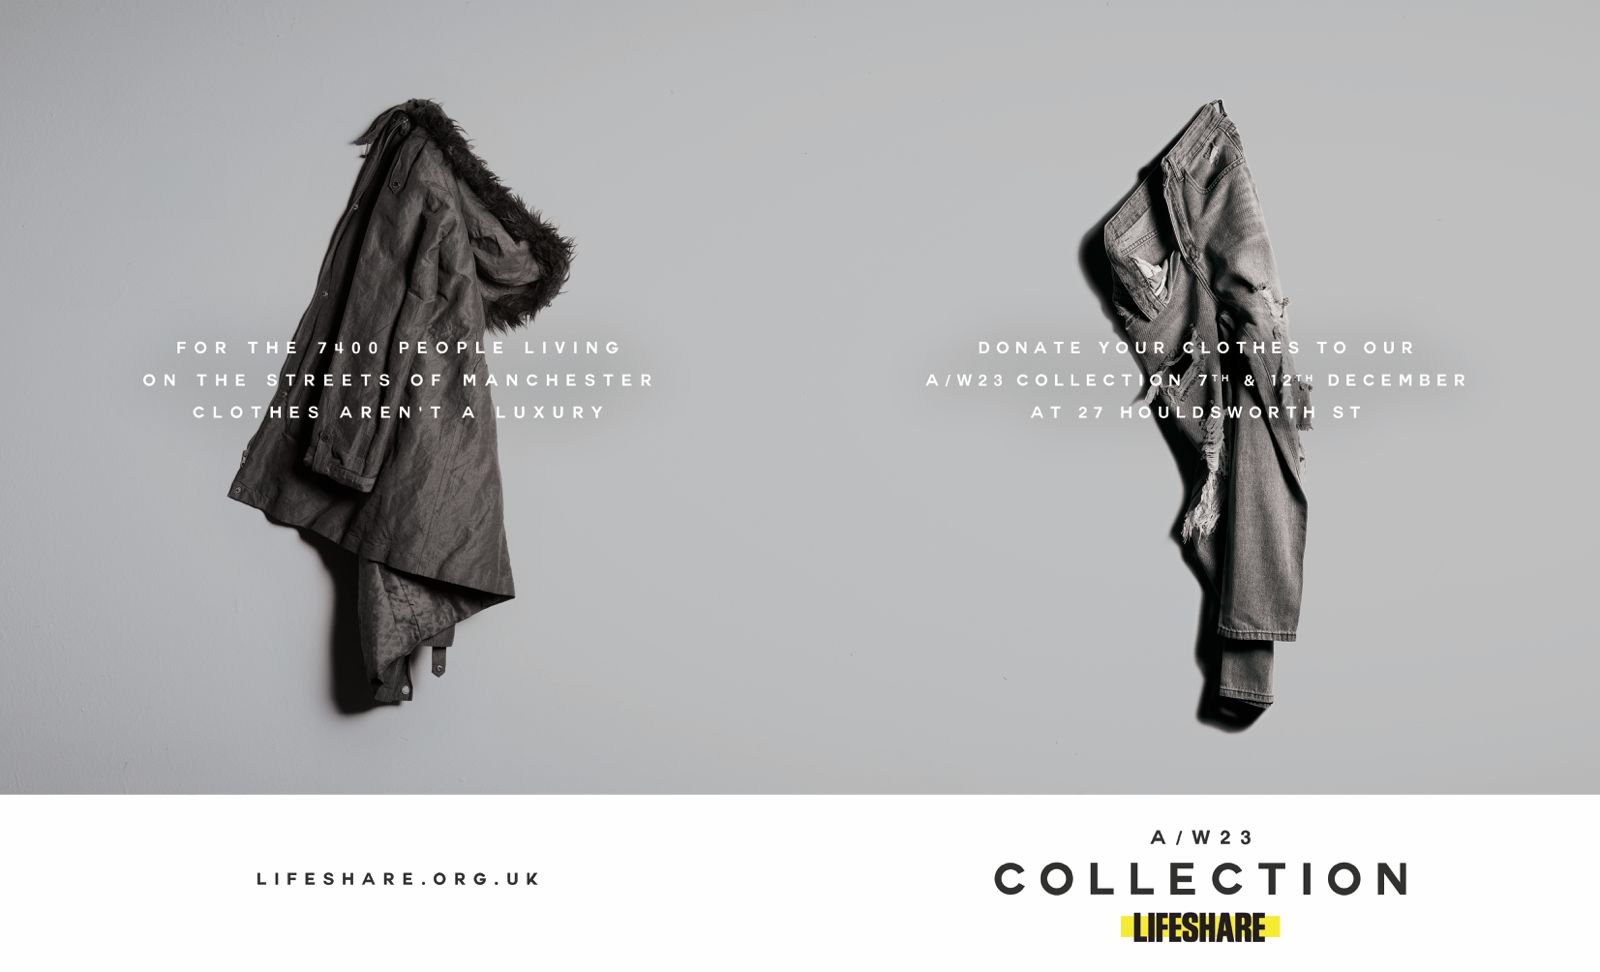 Collection by Lifeshare - Lifeshare